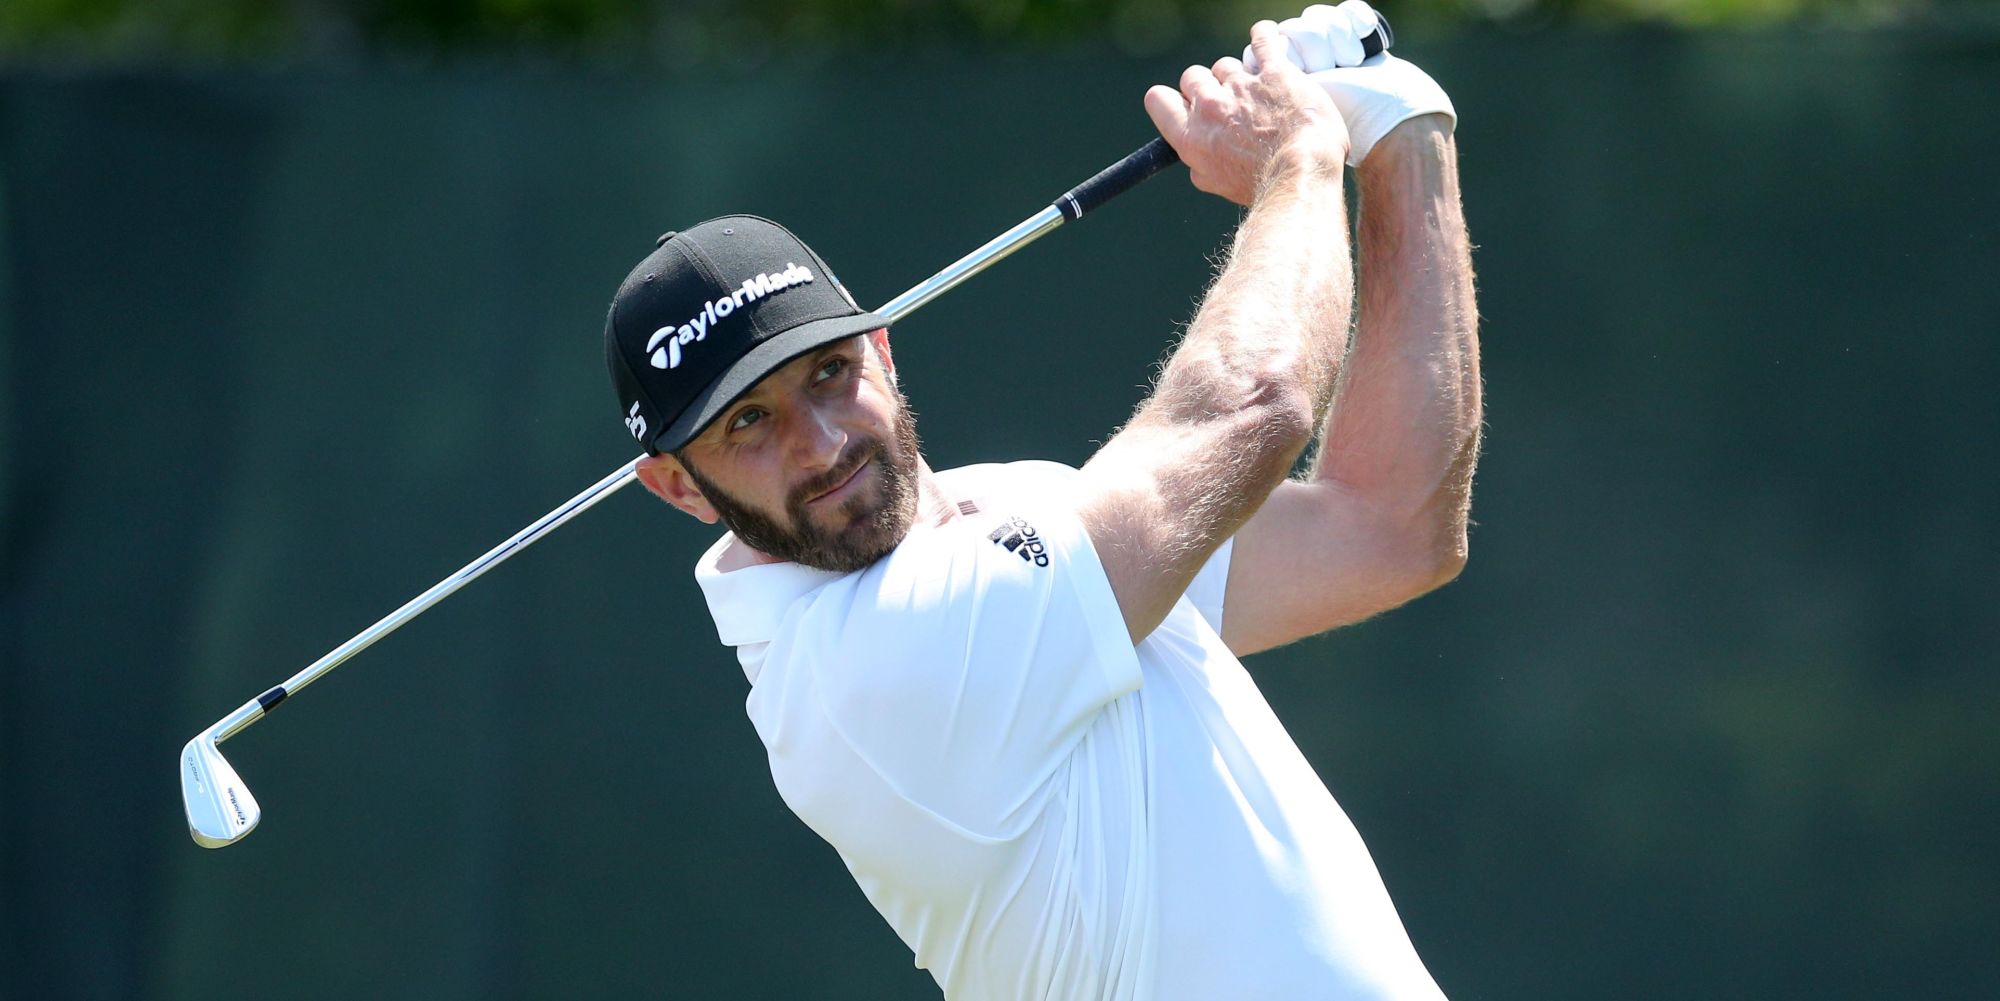 British Open winner trends suggest a Scottish Open spin would've improved Dustin Johnson's chances